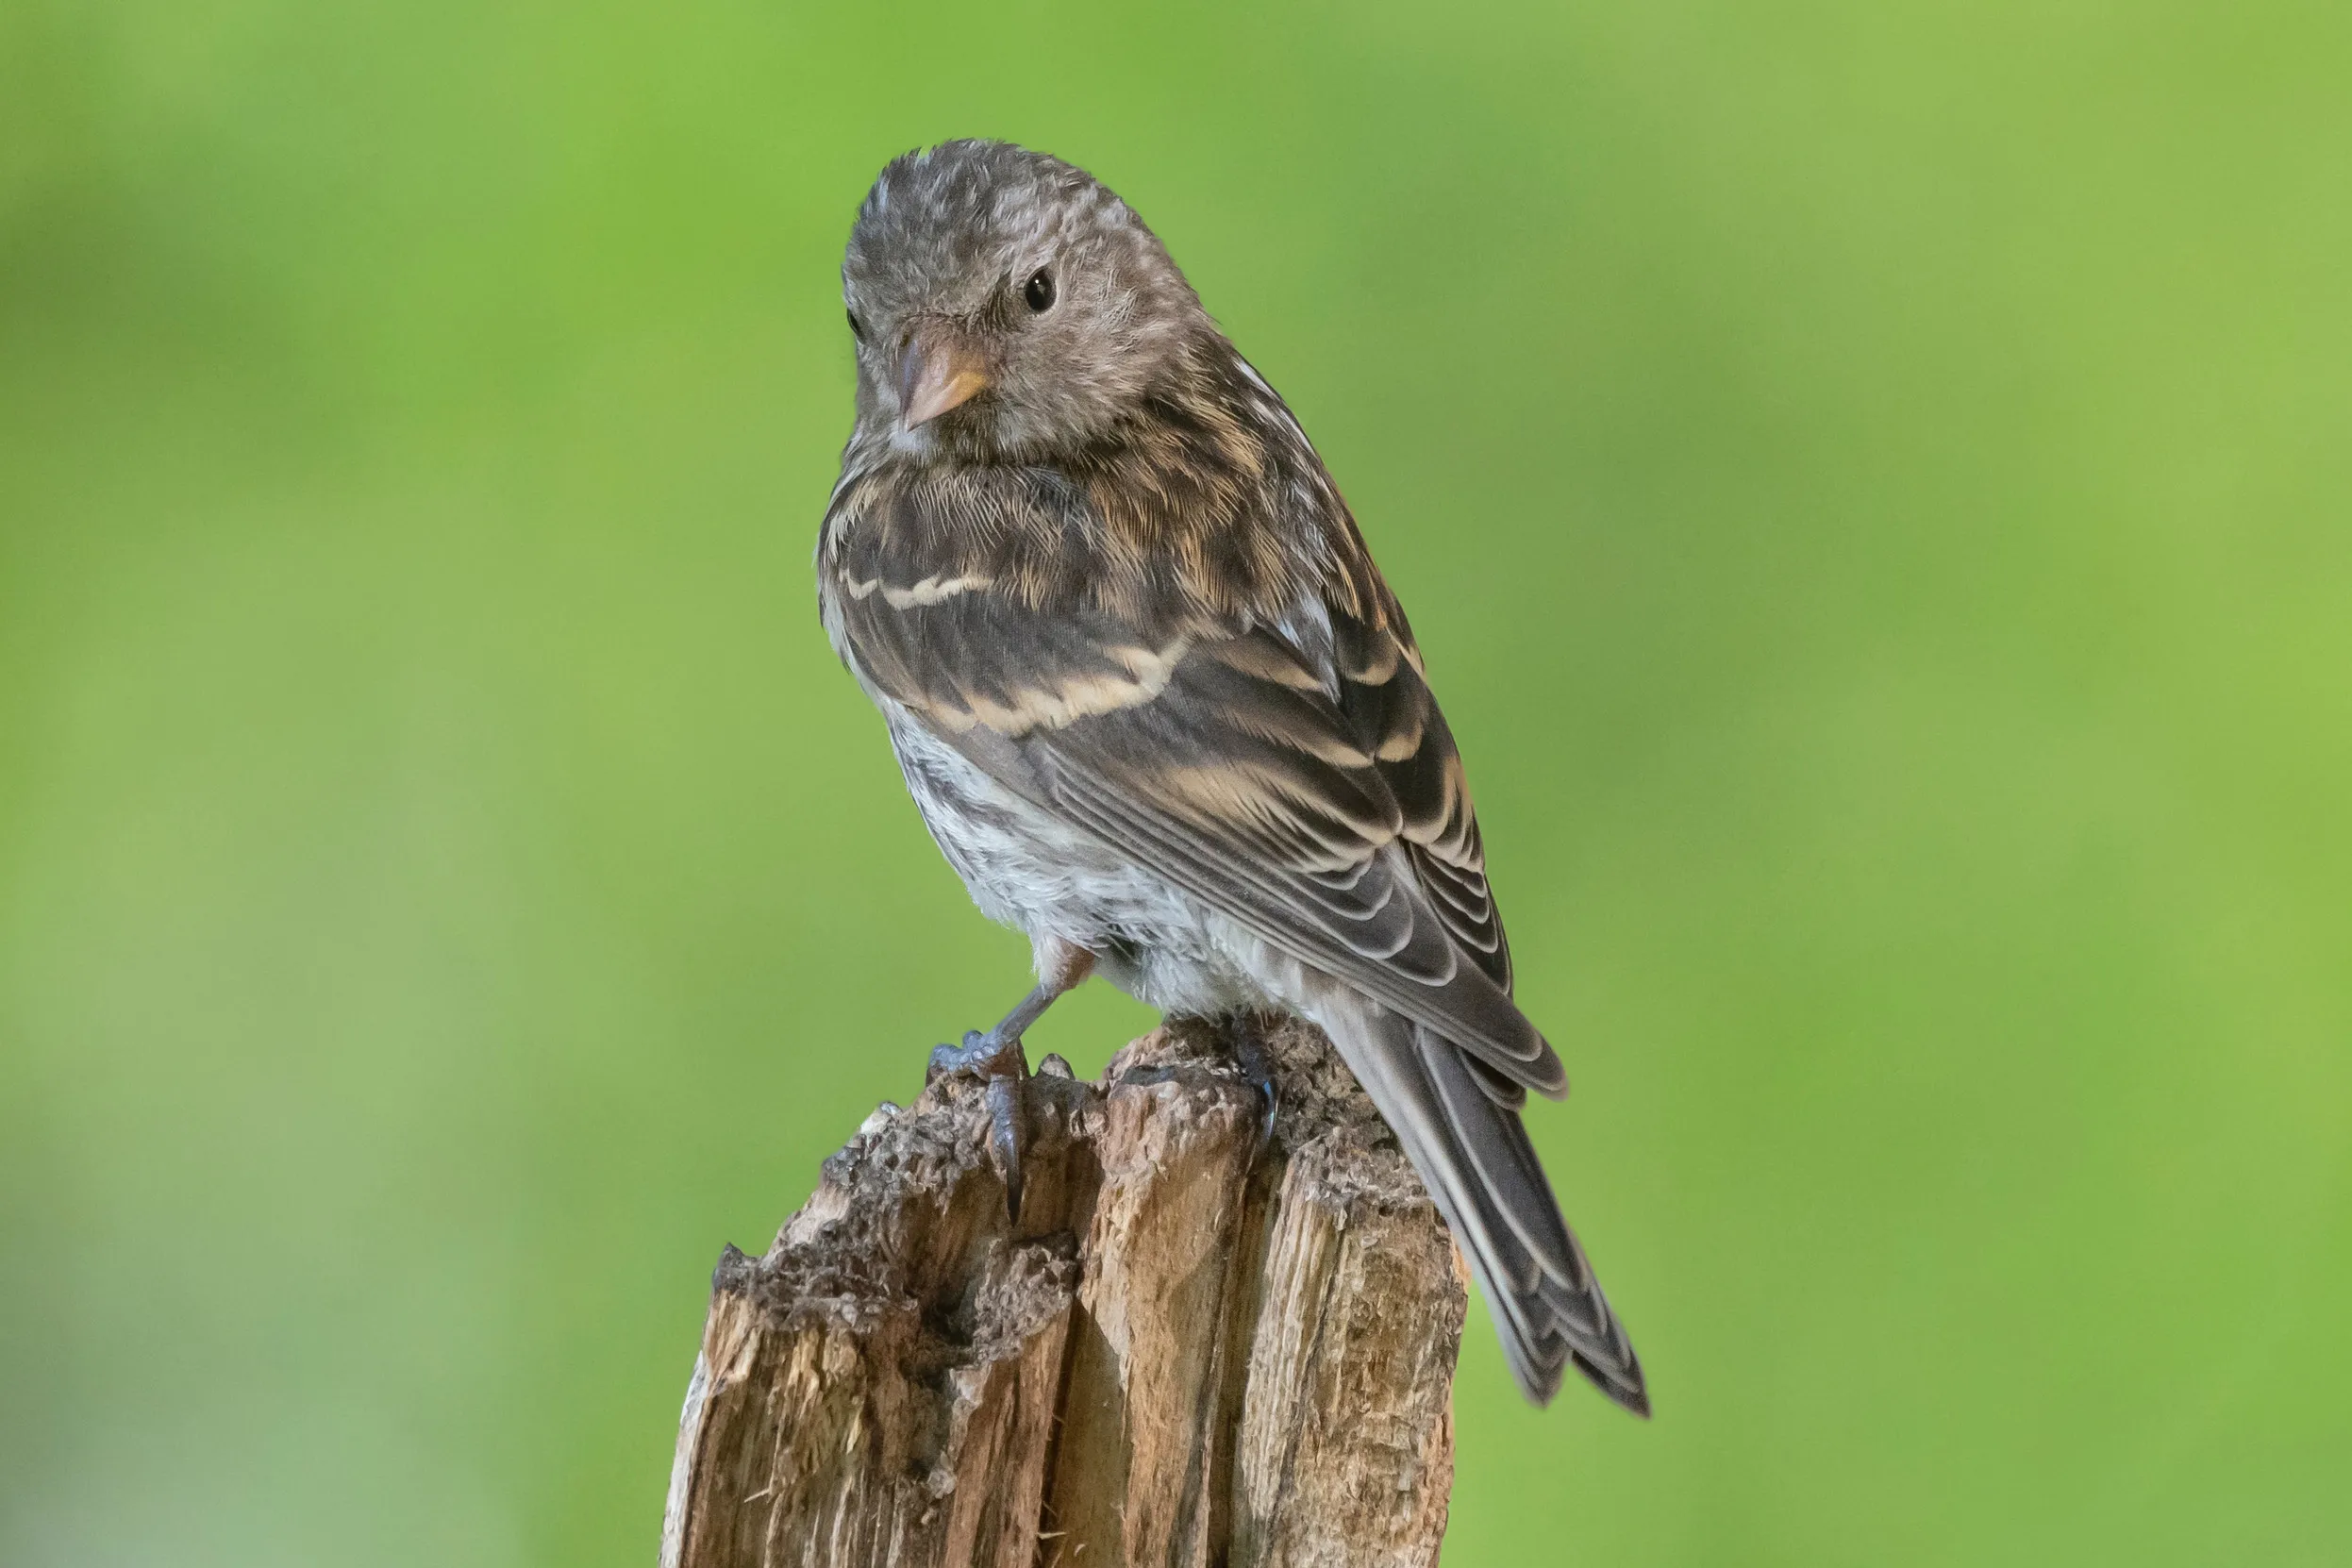 A lone Twite perched on a log.